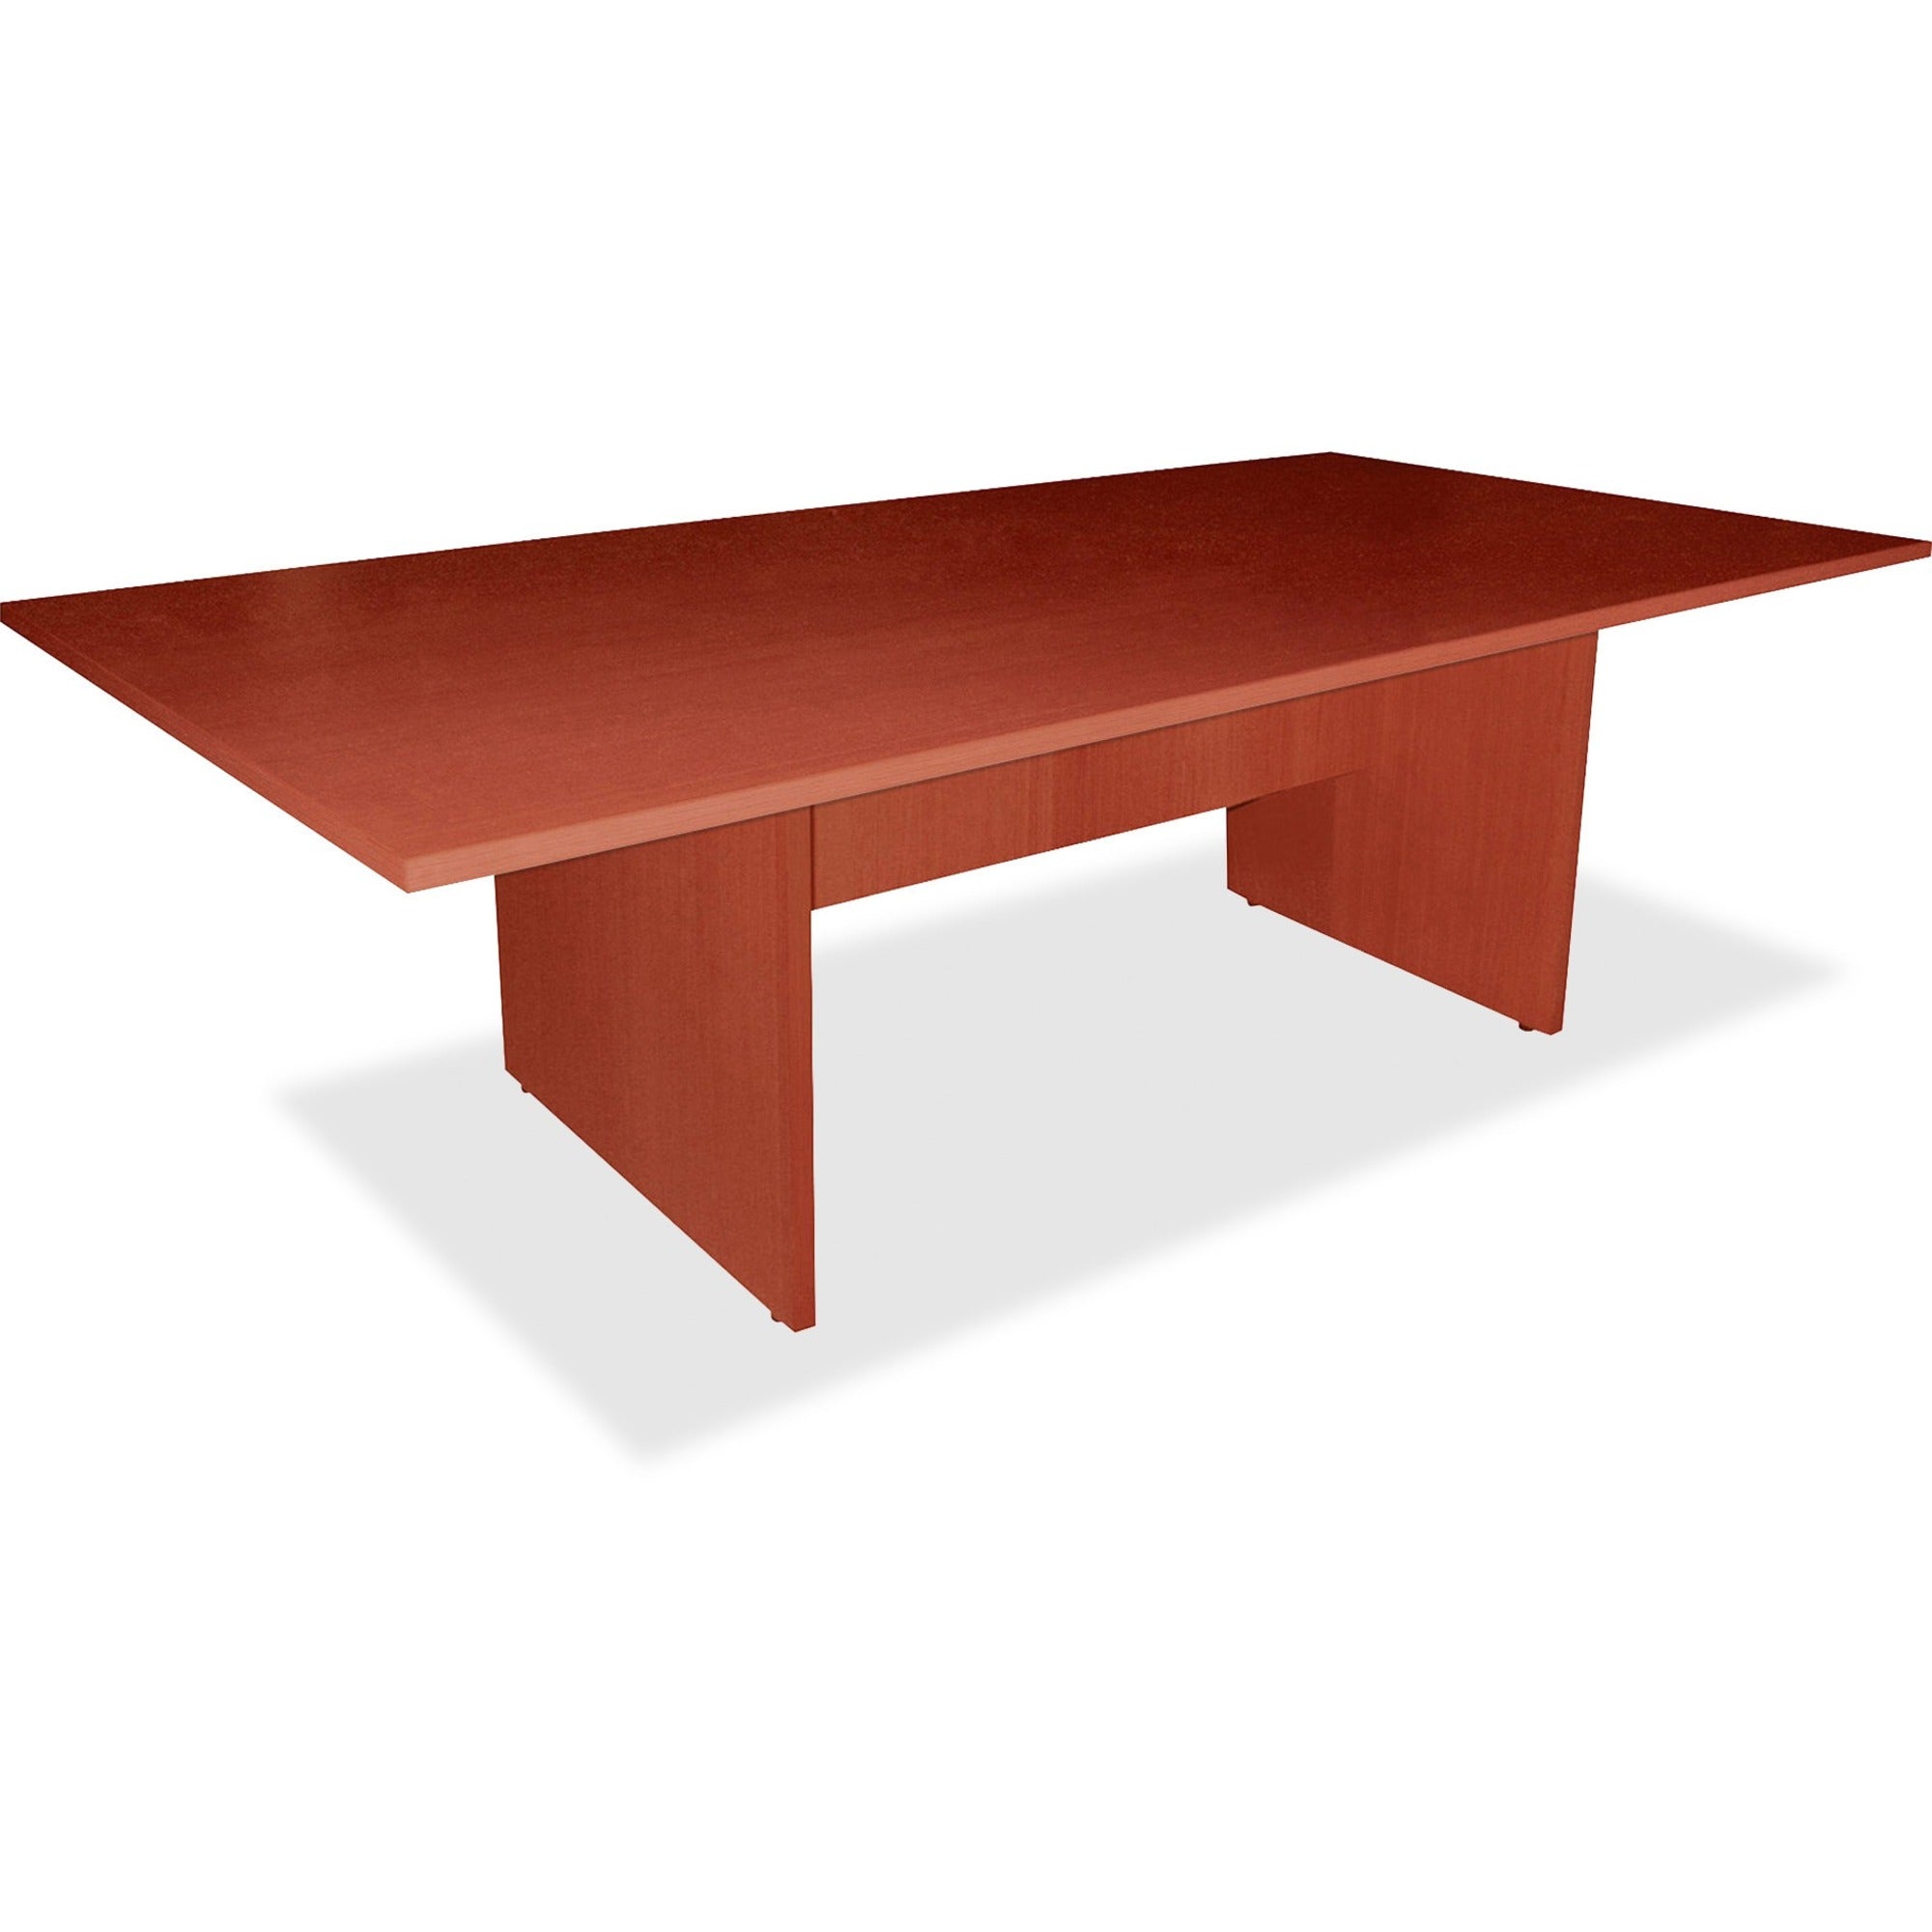 Lorell Essentials Rectangular Modular Conference Table - For - Table TopCherry Rectangle, Laminated Top - Panel Leg Base - 2 Legs x 70.88" Table Top Width x 35.38" Table Top Depth x 1.25" Table Top Thickness - 29.50" Height - Assembly Required - Cher - 